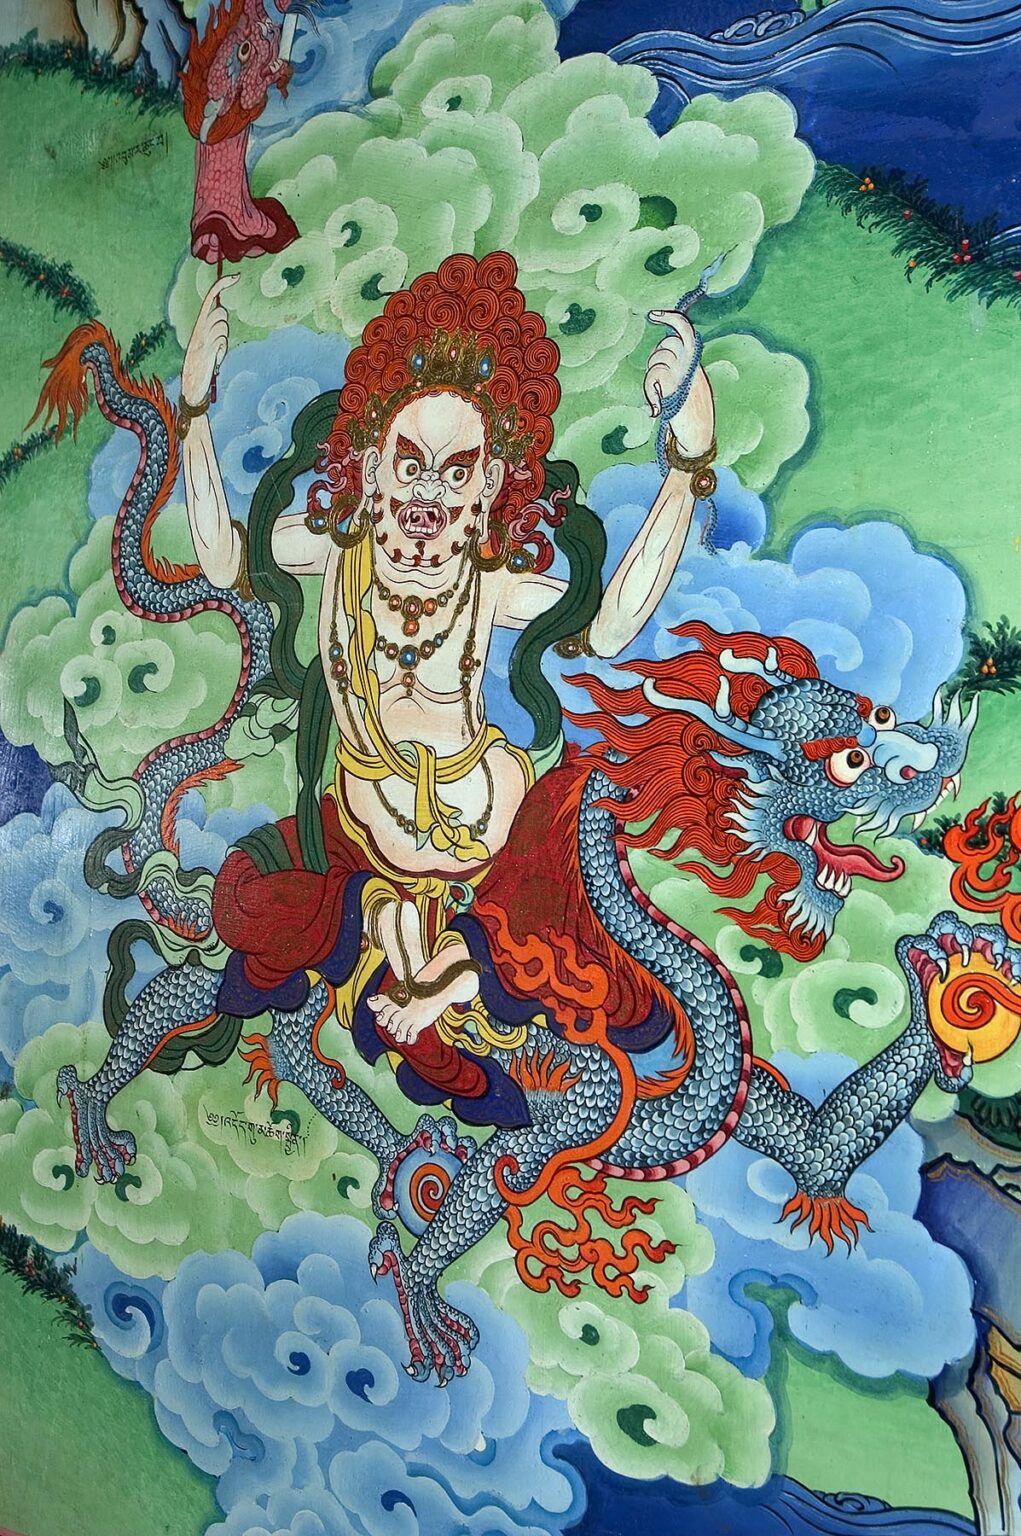 Mural of dragon riding protector at the entrance to the Litang Chode Monastery, Kham - Sichuan Province, China, (Tibet)